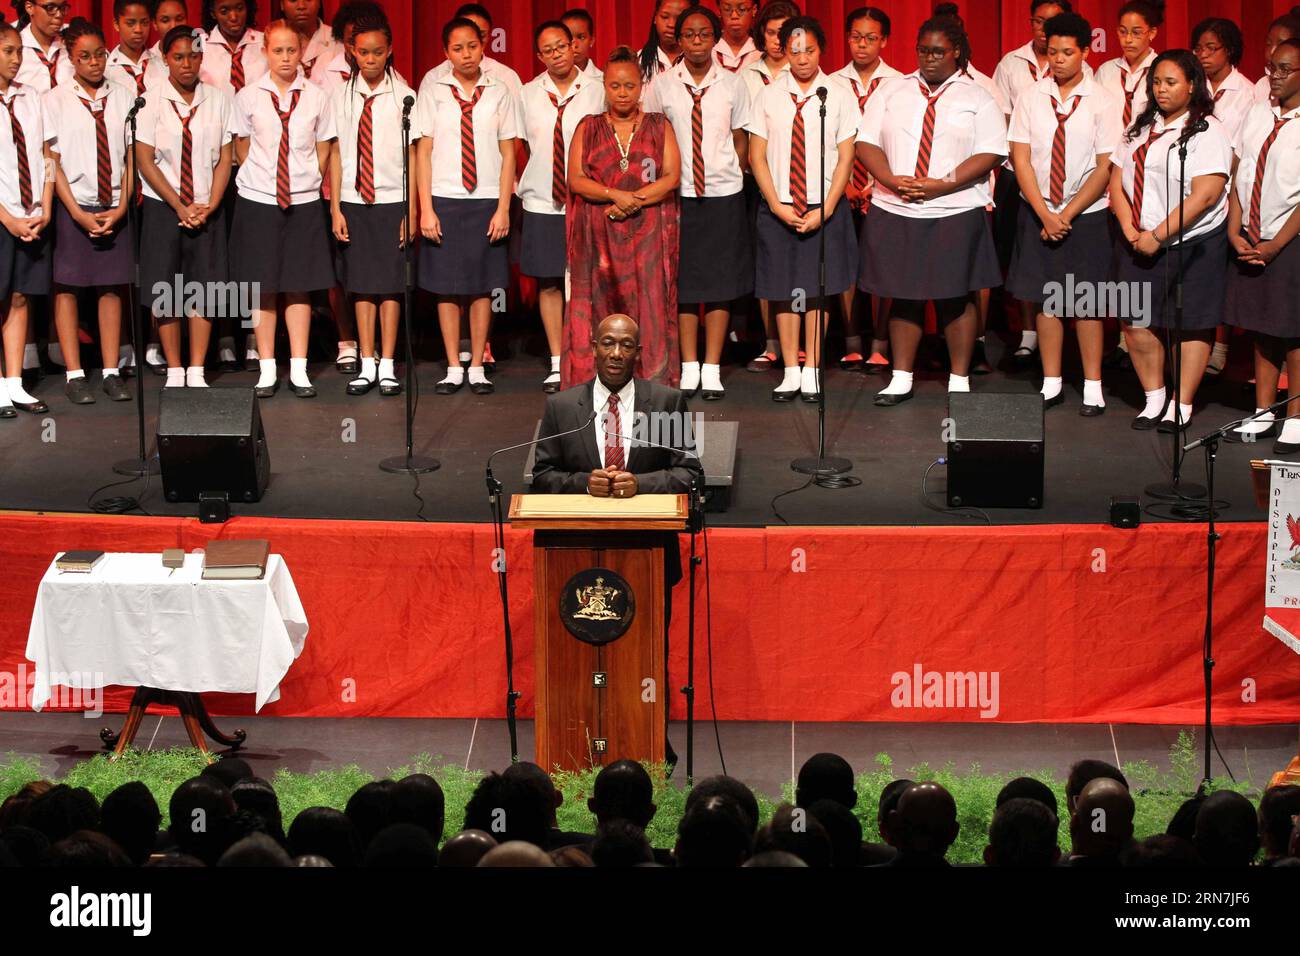 (150909) -- PORT OF SPAIN, Sept. 9, 2015 -- Trinidad and Tobago s People s National Movement (PNM) leader Keith Rowley(C, front), delivers a speech during his swearing-in ceremony as the country s new prime minister in Port of Spain, capital of Trinidad and Tobago, on Sept. 9, 2015. Trinidad and Tobago s People s National Movement (PNM) leader Keith Rowley was sworn in Wednesday as the country s new prime minister by President Anthony Carmona in a ceremony held here. ) (fnc) TRINIDAD AND TOBAGO-PORT OF SPAIN-PM-INAUGURATION GaoxXing PUBLICATIONxNOTxINxCHN   150909 Port of Spain Sept 9 2015 Tri Stock Photo